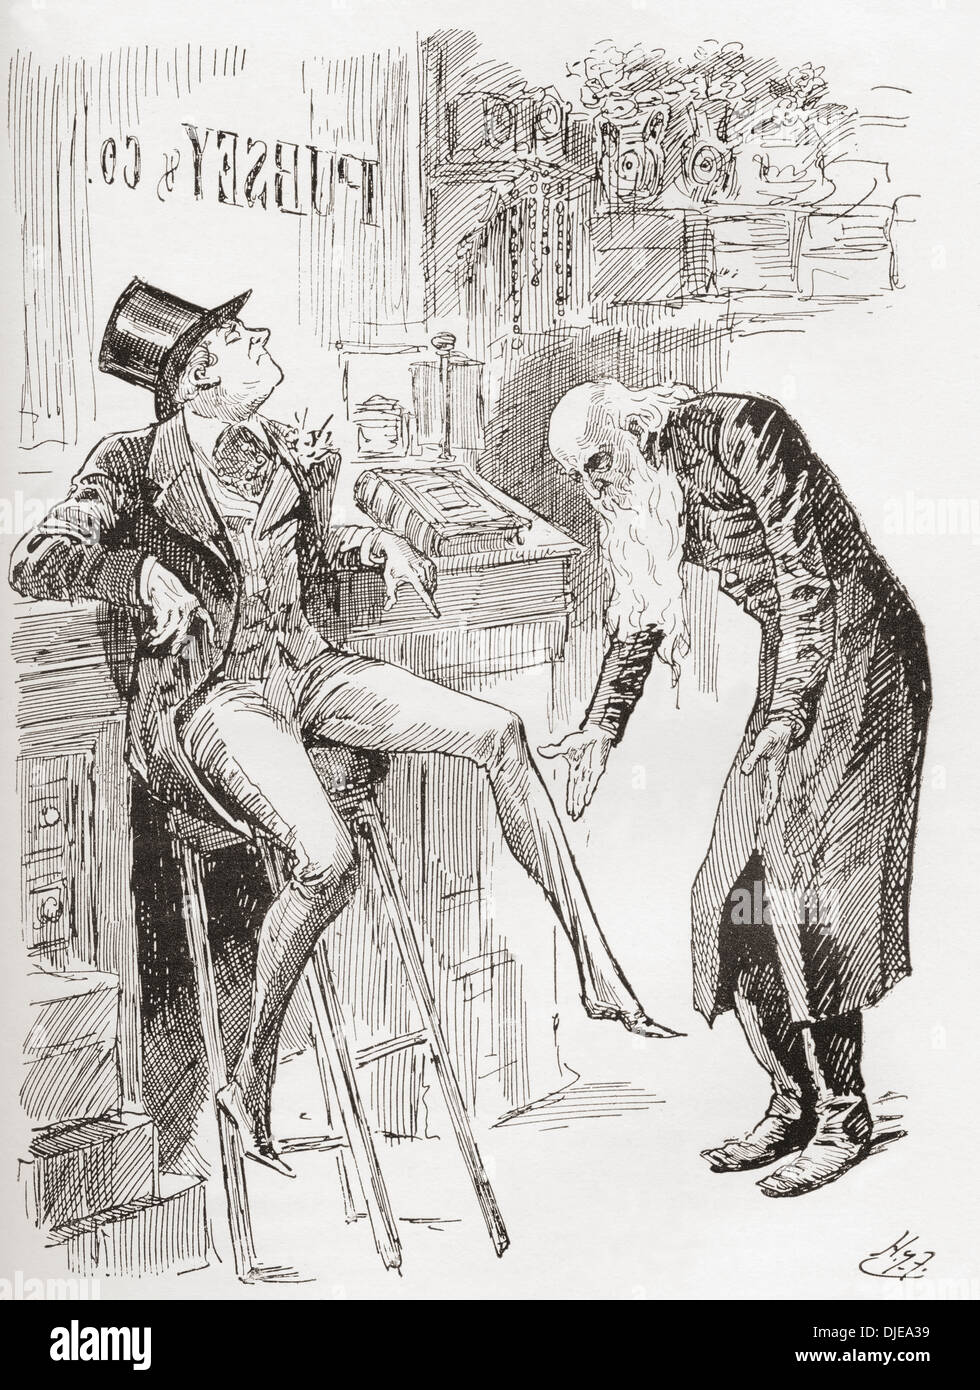 Fledgeby and Mr. Riah in the Counting House.  Illustration by Harry Furniss for the Charles Dickens novel Our Mutual Friend. Stock Photo